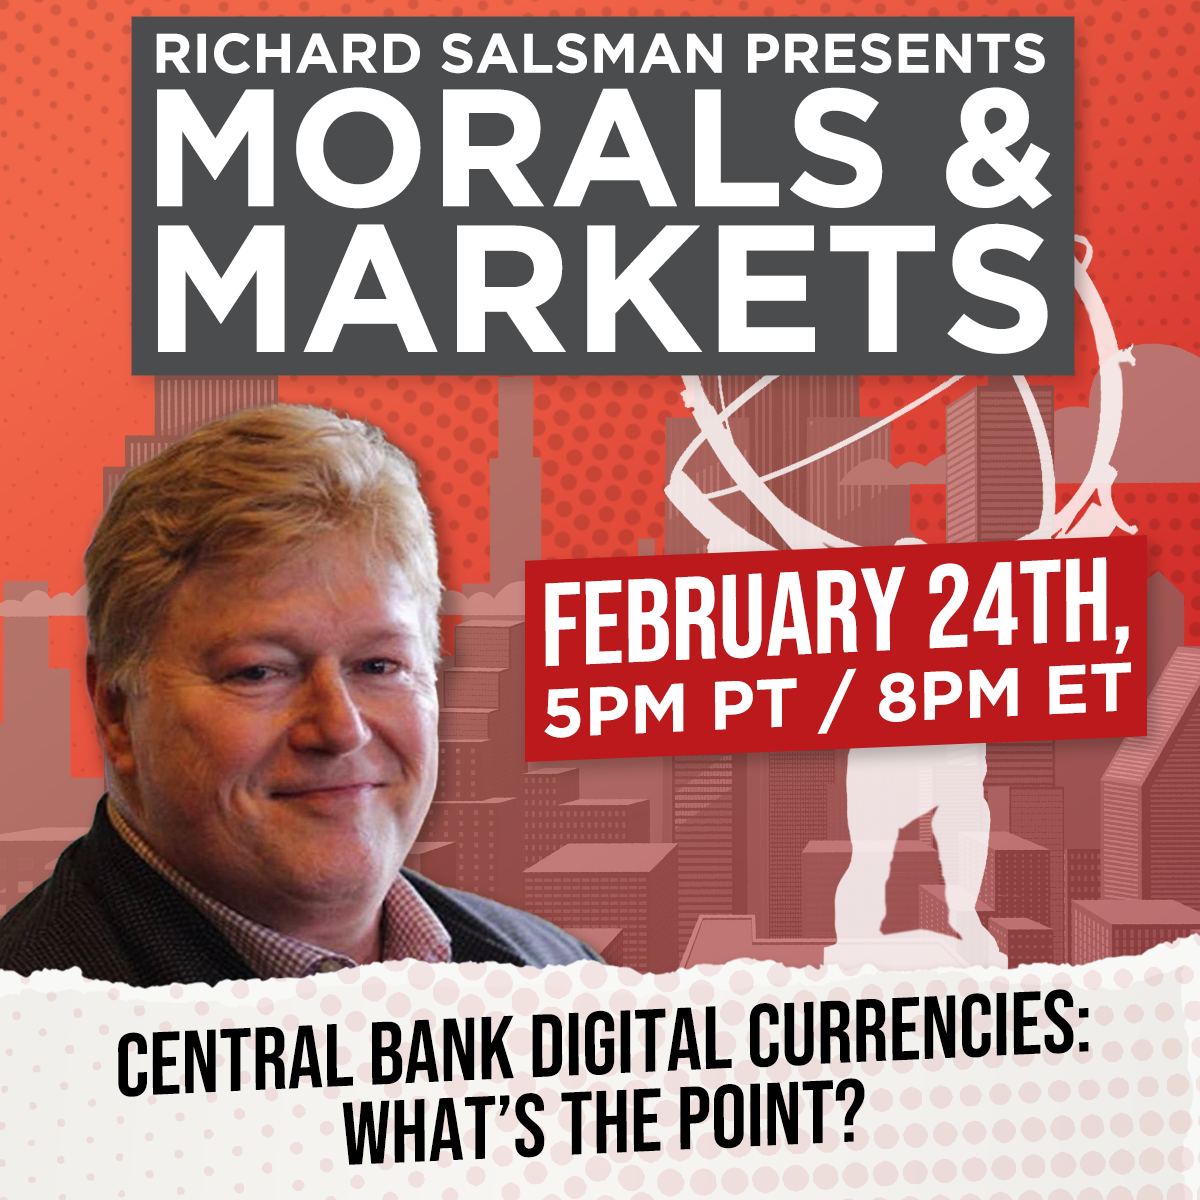 Central Bank Digital Currencies: What's The Point?